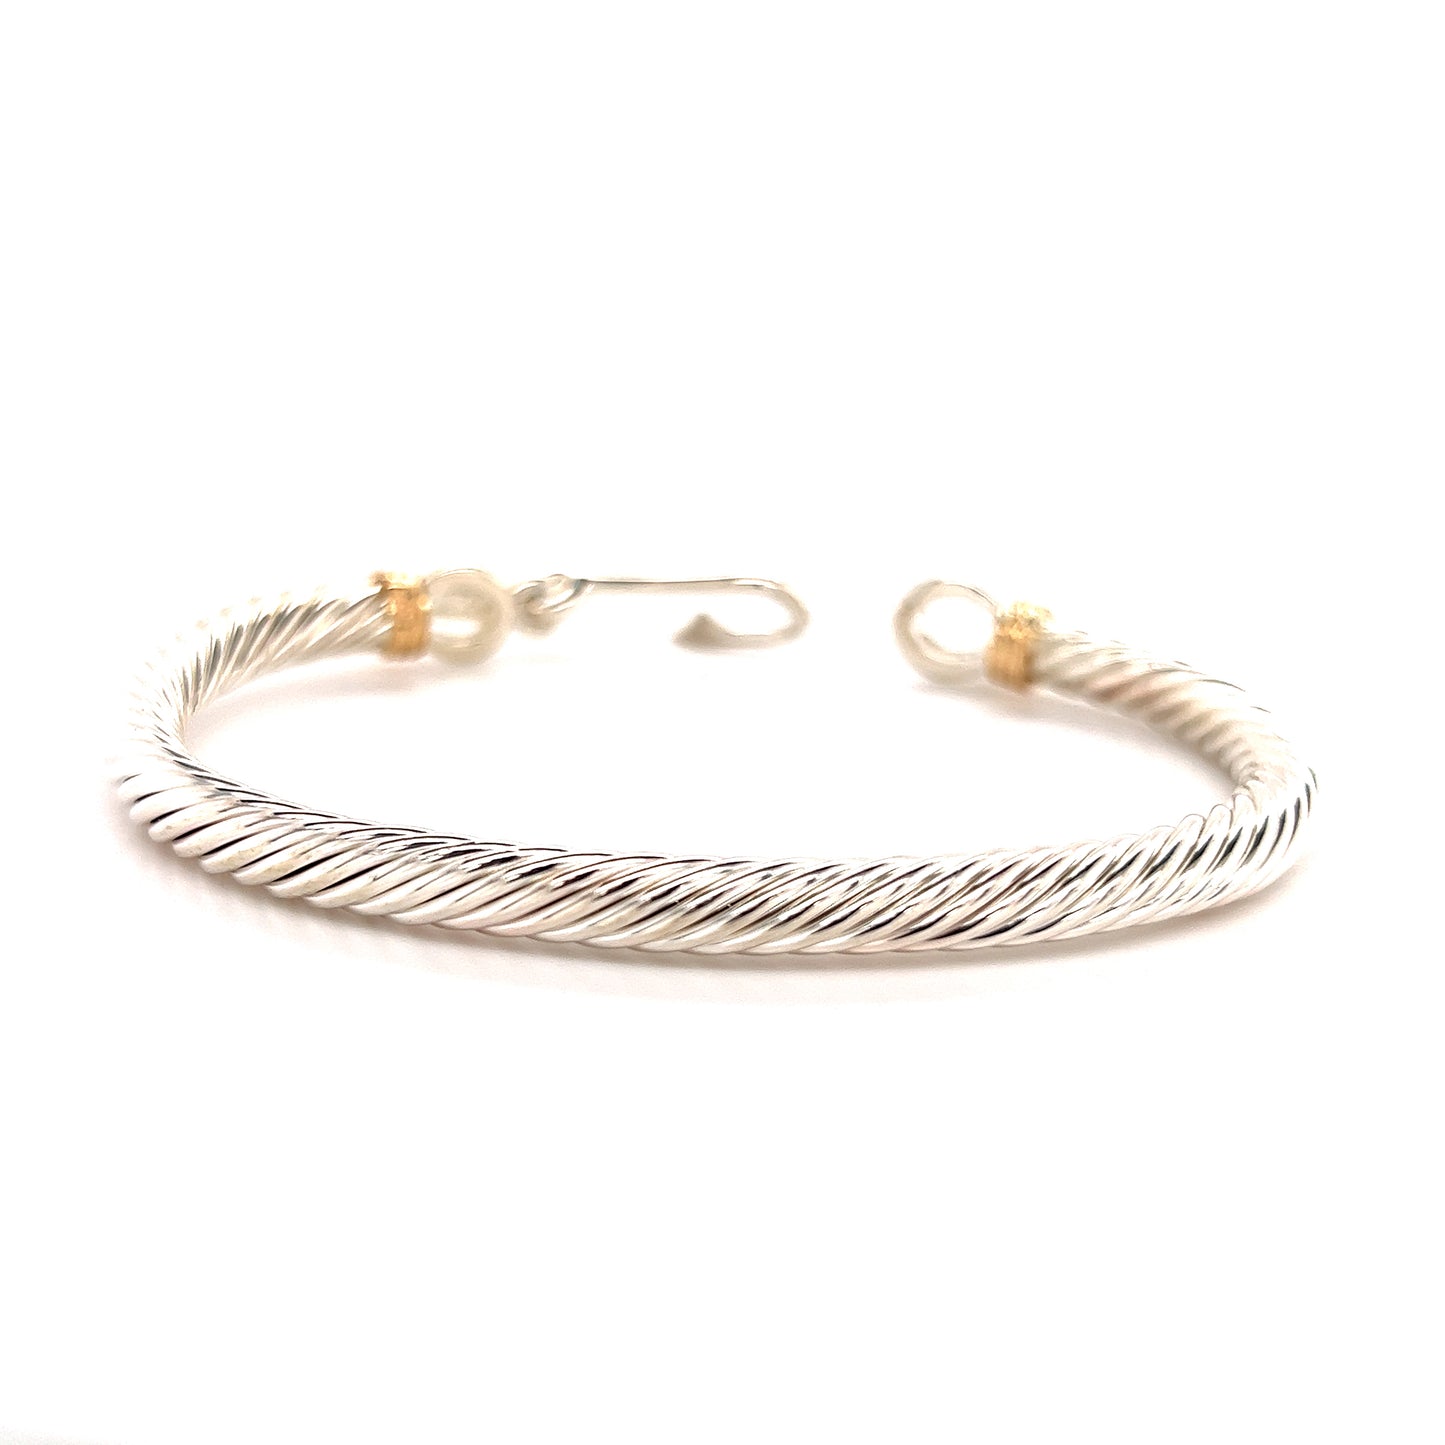 Fish Hook Cable 5mm Bangle Bracelet with 14K Wraps in Sterling Silver Back View with Open Clasp